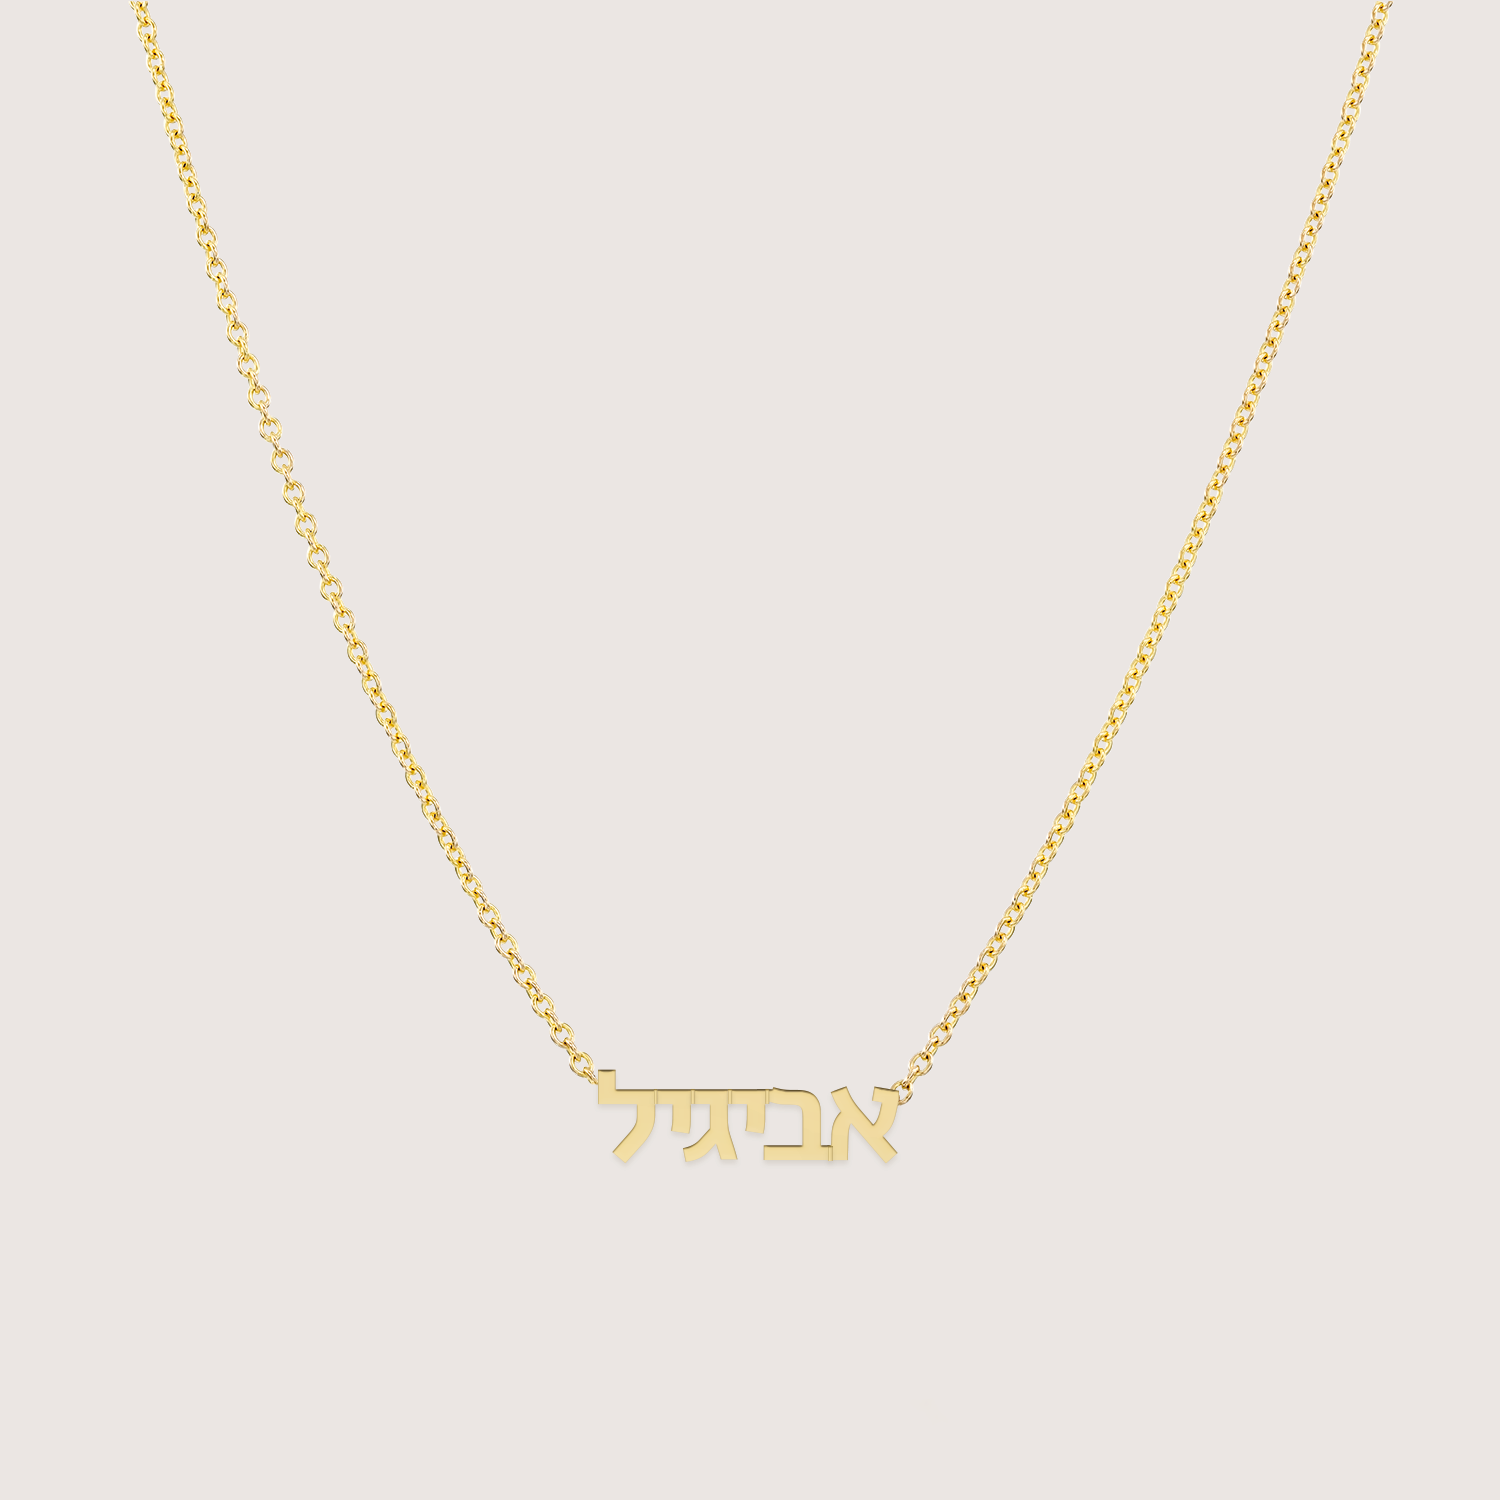 Hebrew Name Necklace - Small